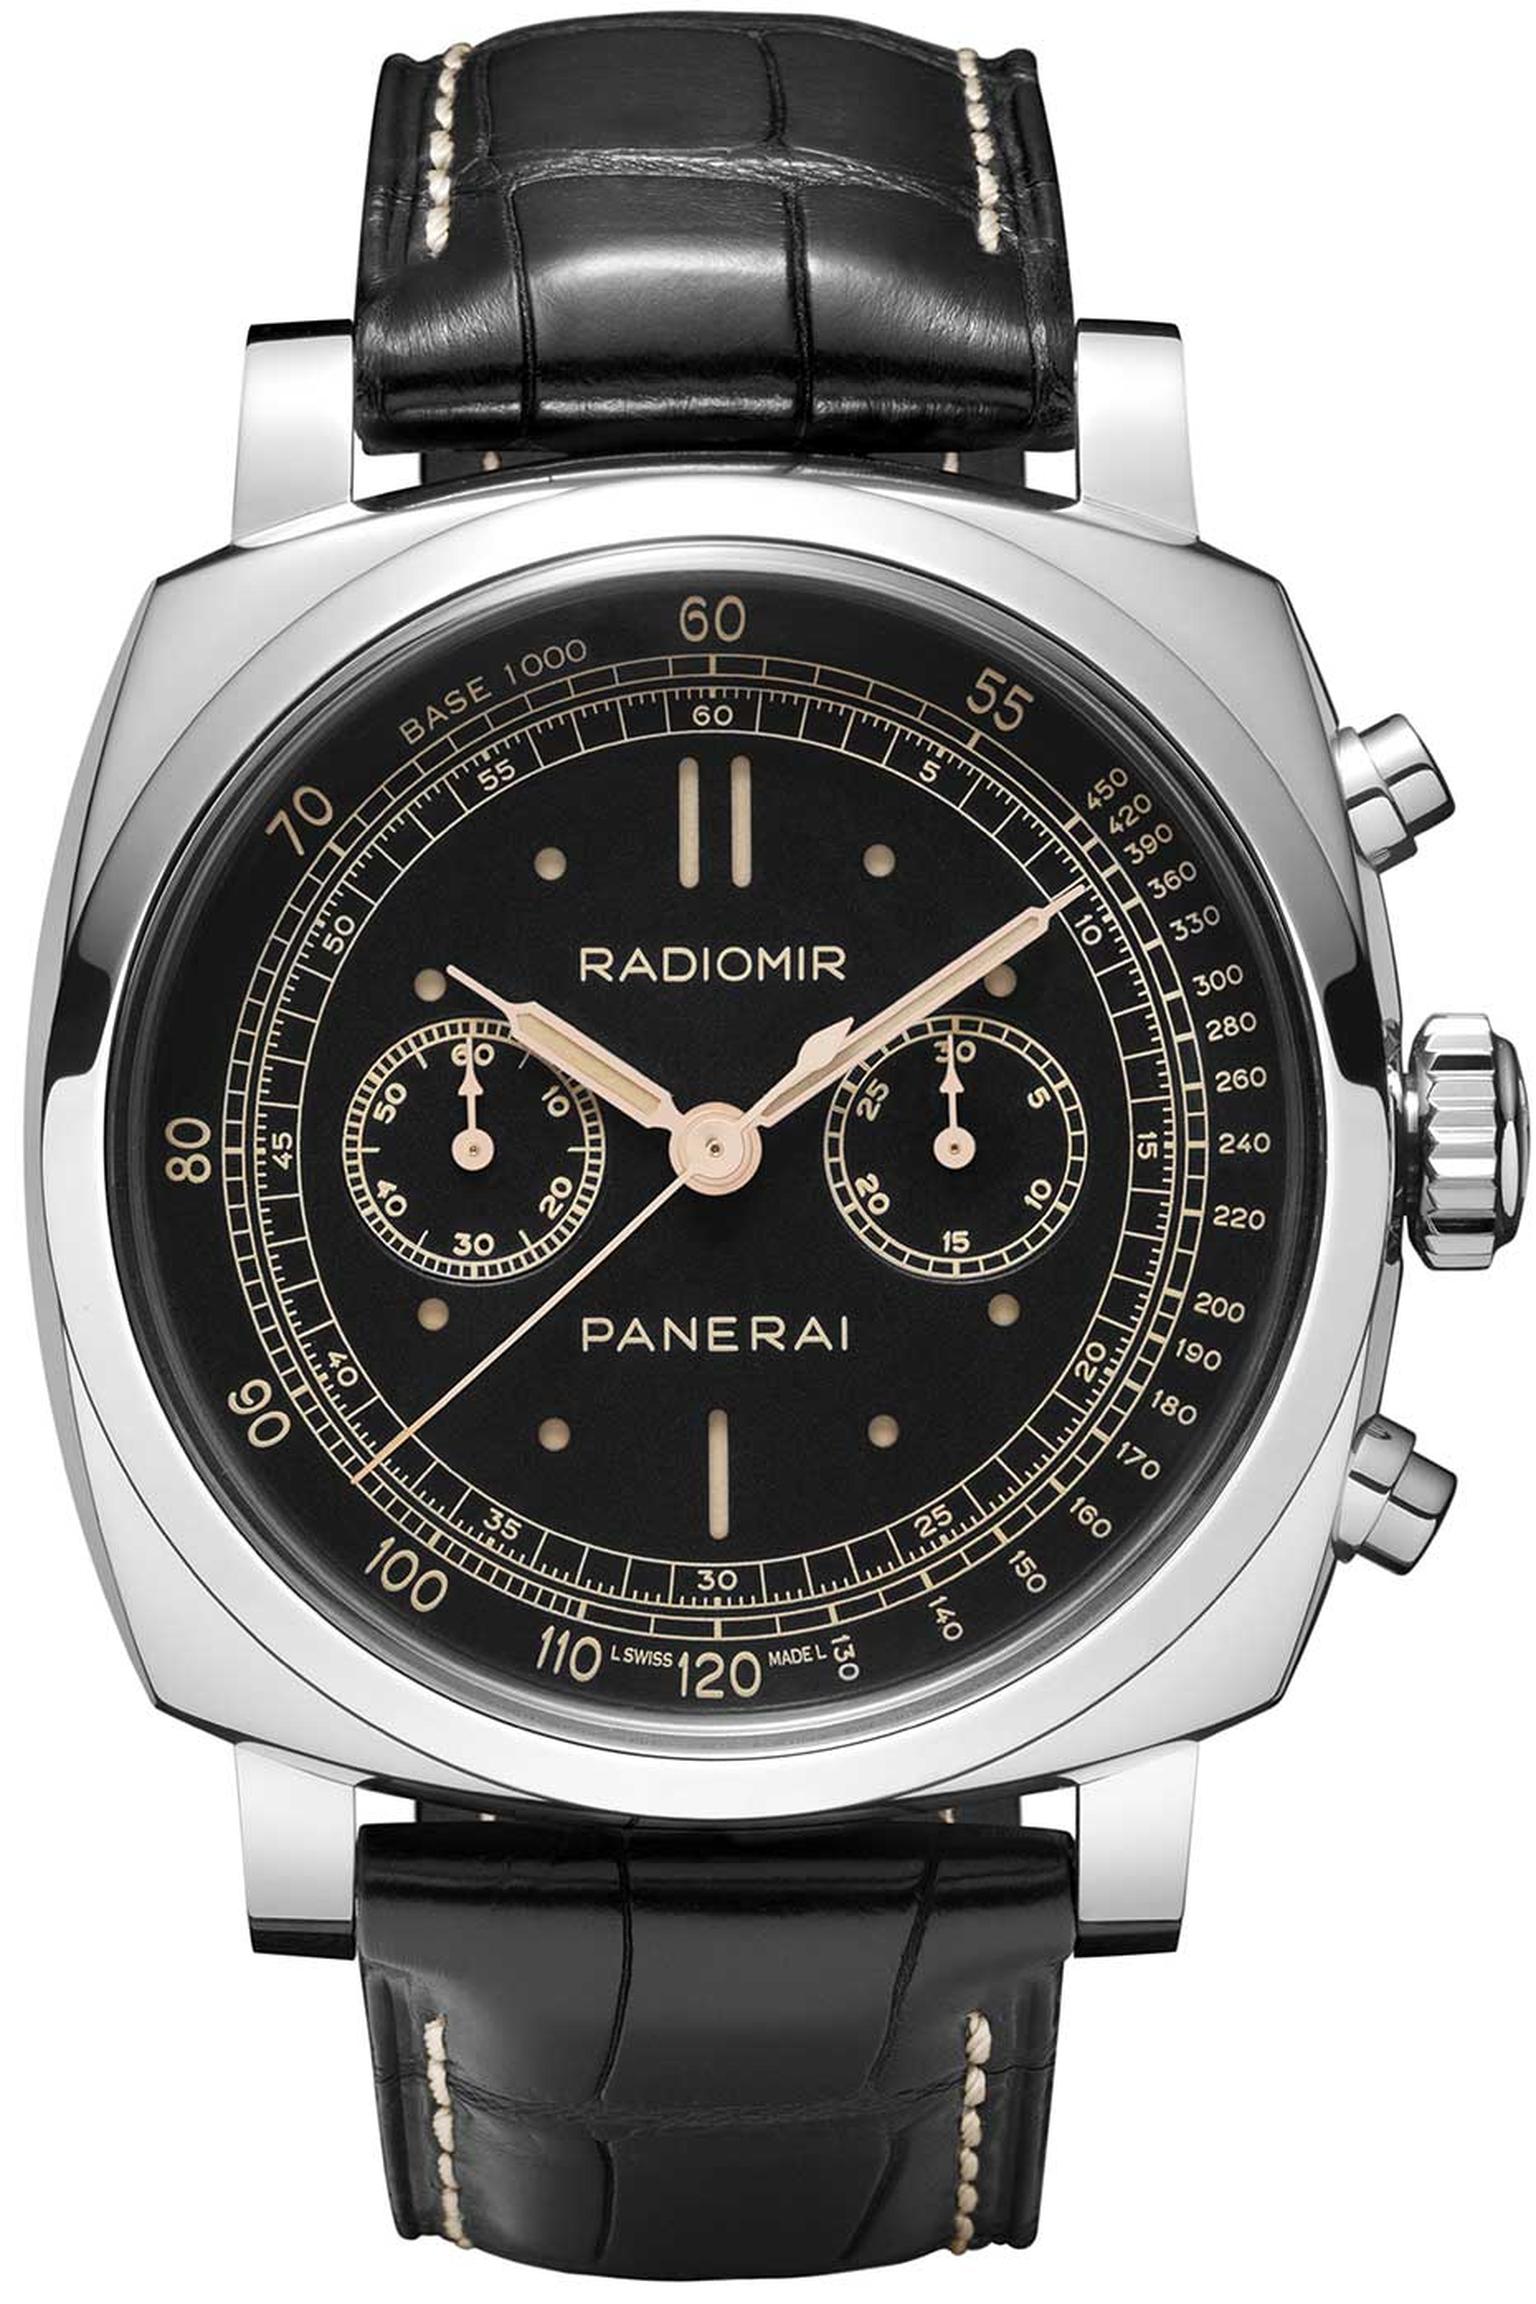 Panerai's Radiomir 1940 Chronograph watch features a large 45mm white gold cushion-shaped case.